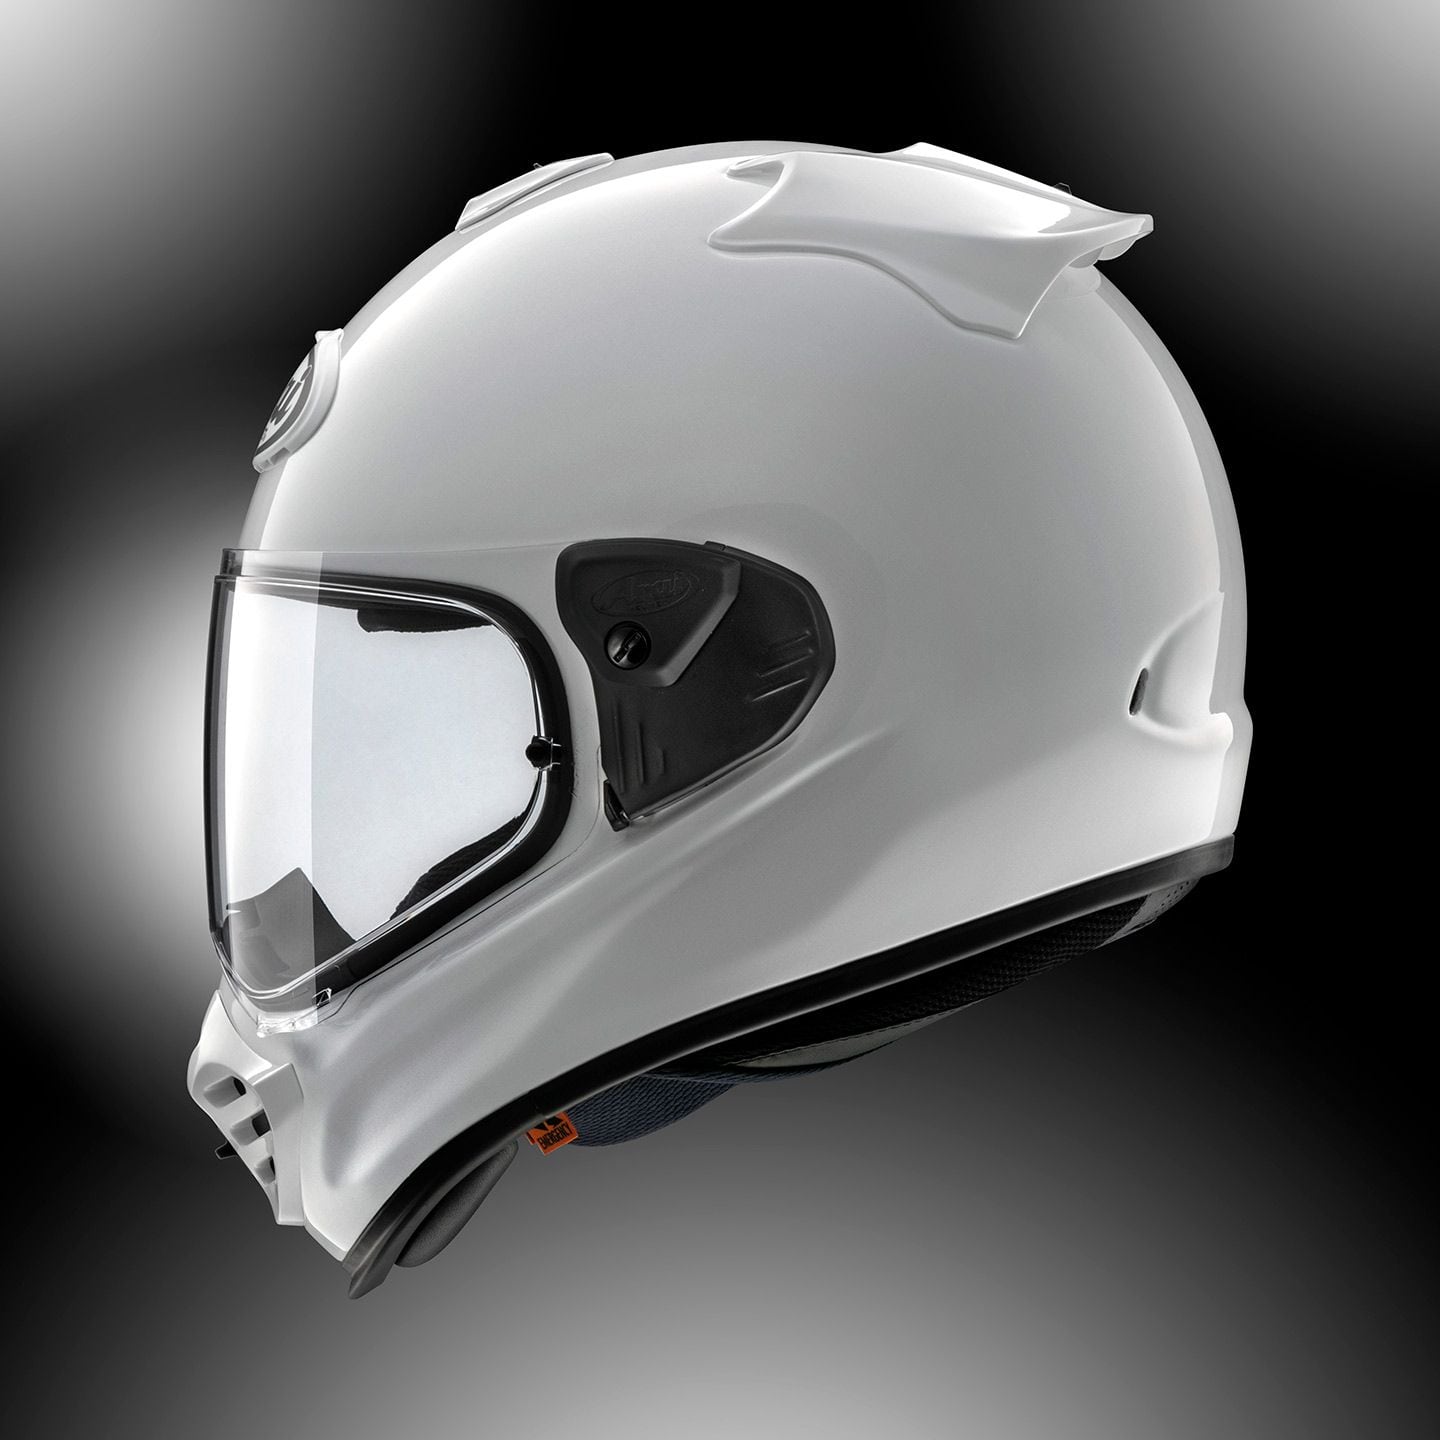 Arai made its new visor and face shield easy to take off or install without the need for tools.